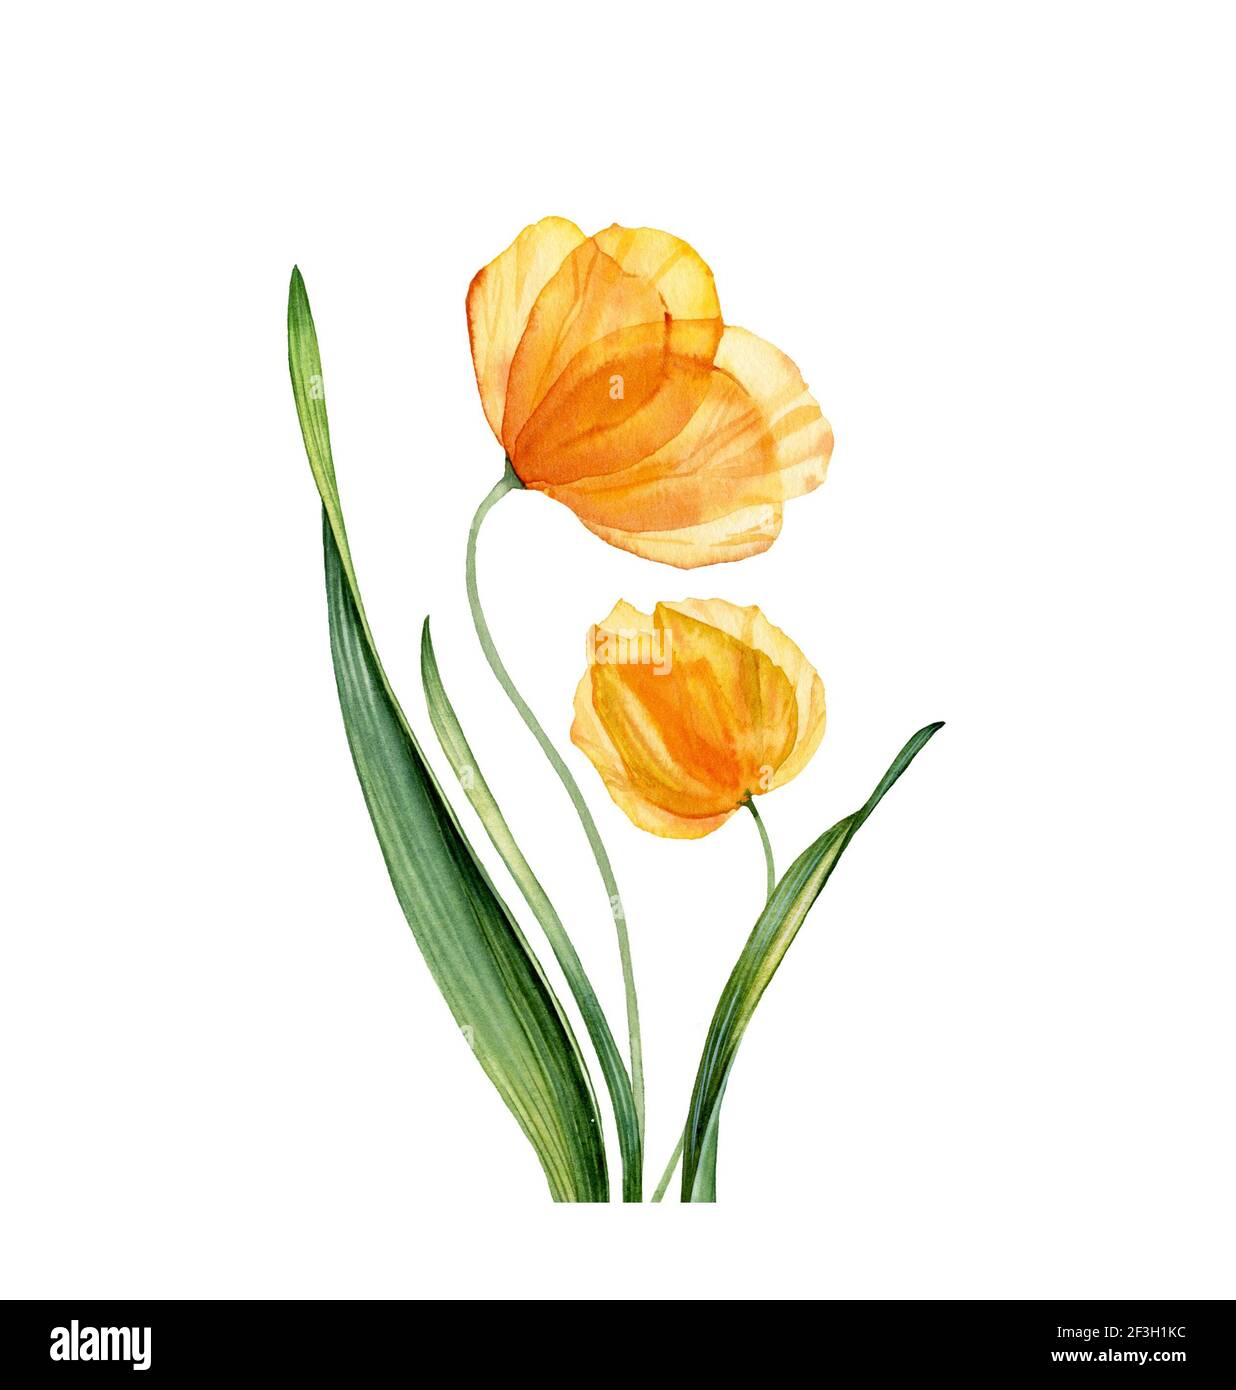 Watercolor yellow tulips. Spring orange flowers with green leaves. Floral hand drawn composition. Realistic botanical illustration for Easter cards Stock Photo